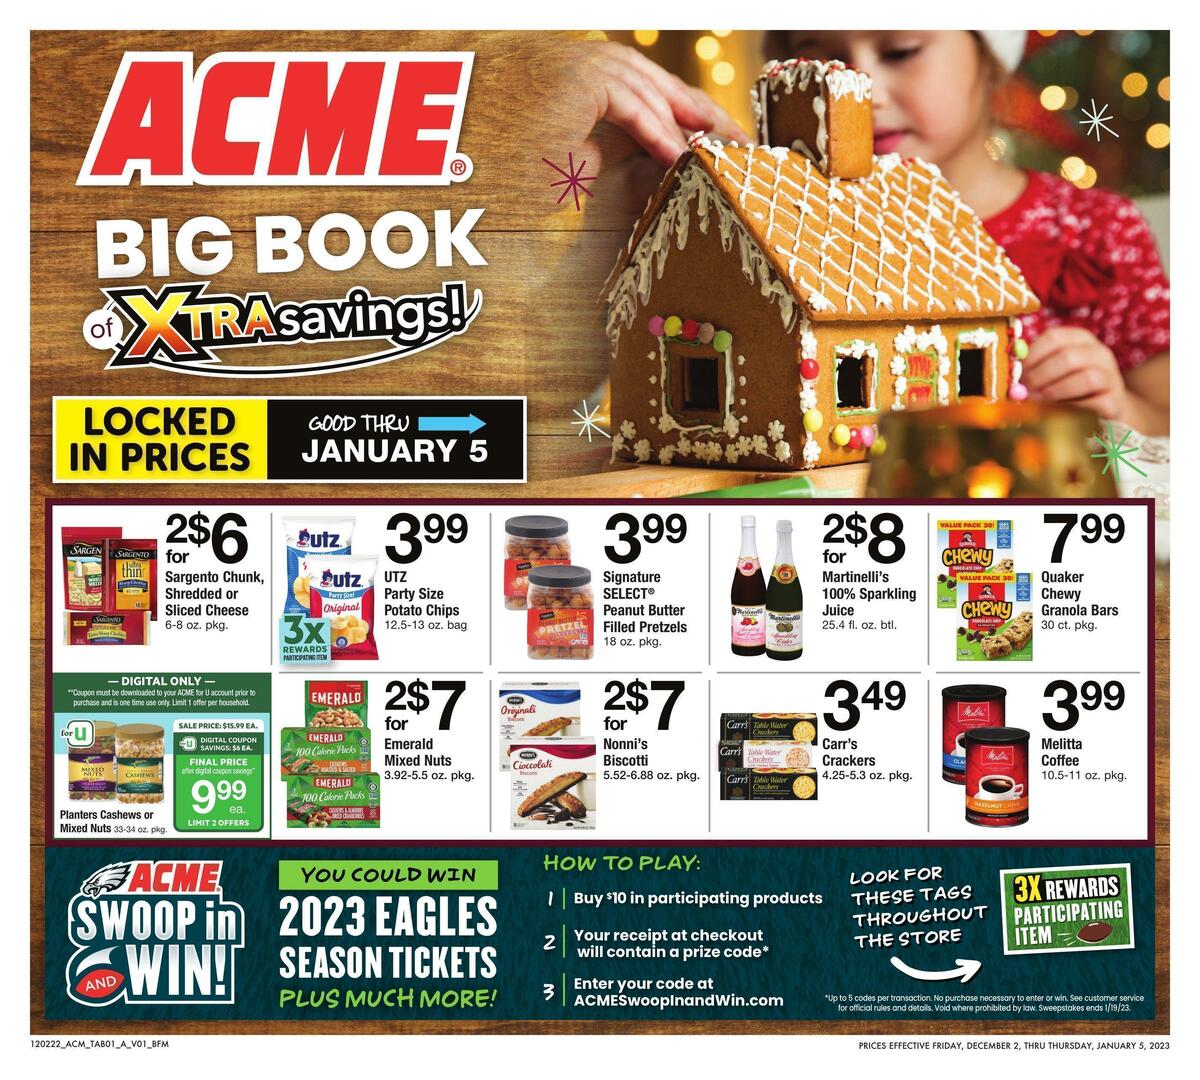 ACME Markets Big Book of Savings Weekly Ads & Special Buys from December 2